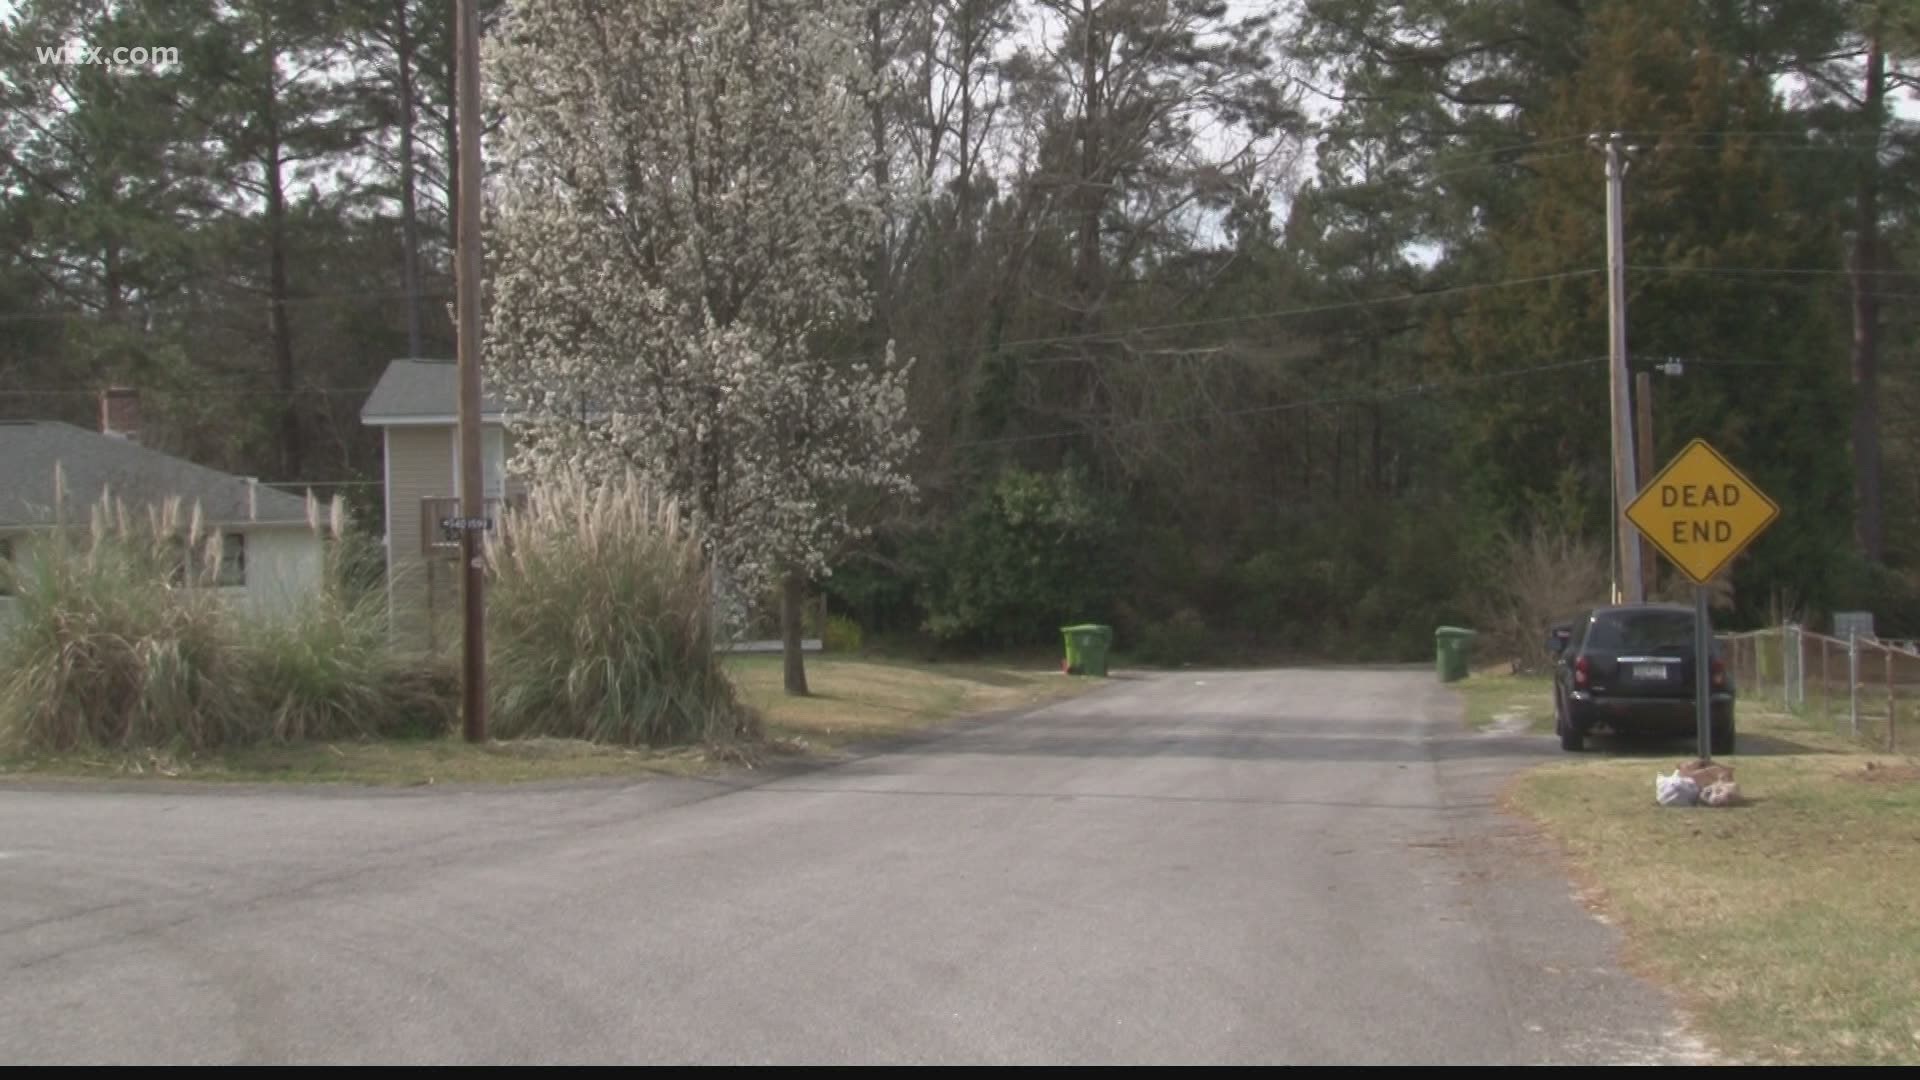 One parent was found dead on the side of the road in Aiken.